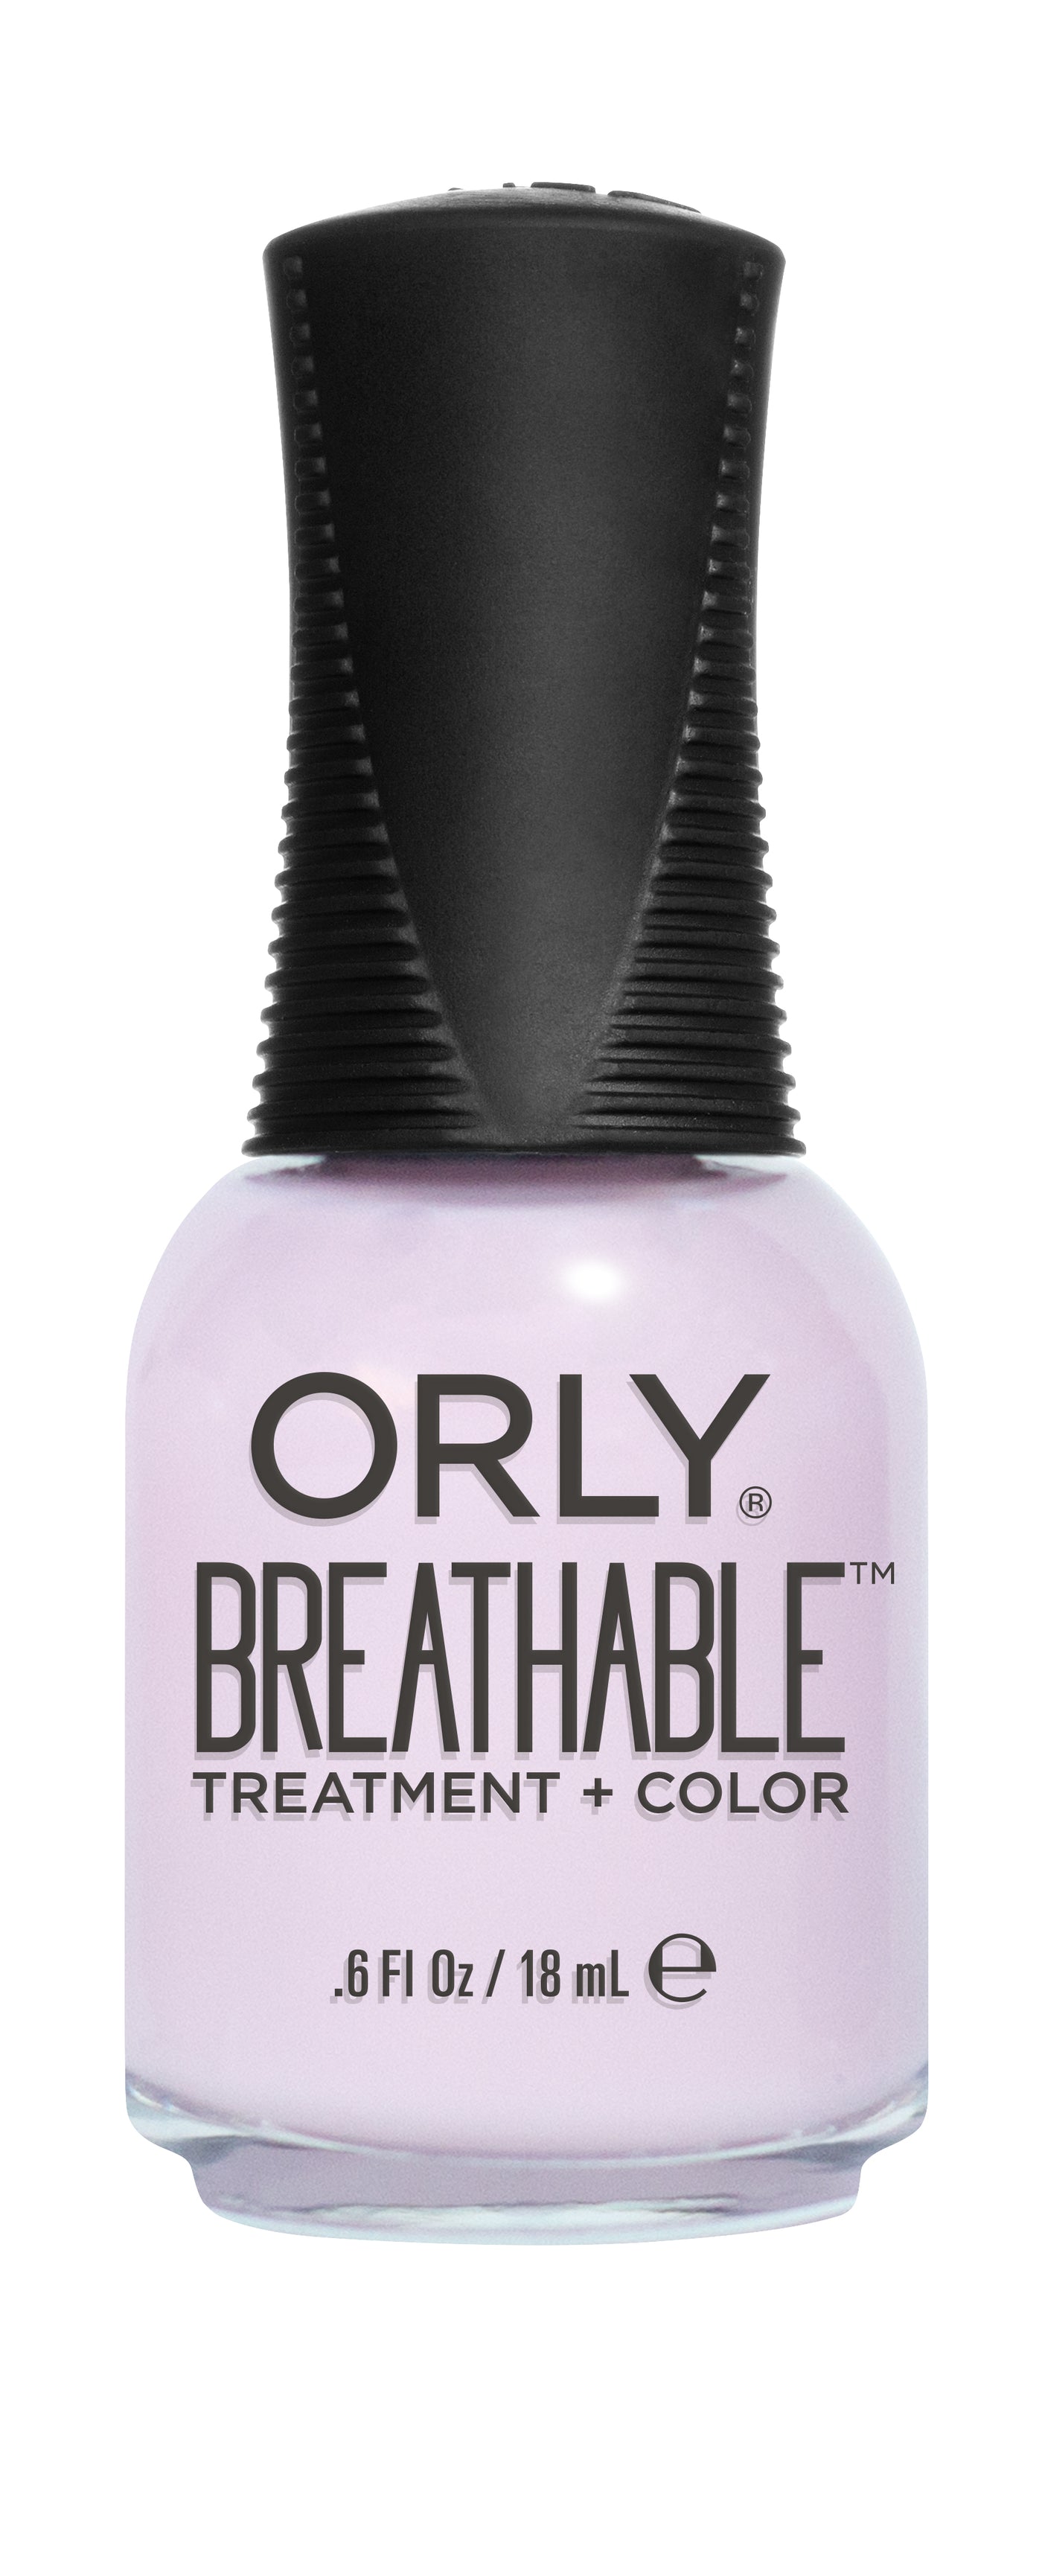 ORLY BREATHABLE NAIL POLISH - BARELY THERE 20908